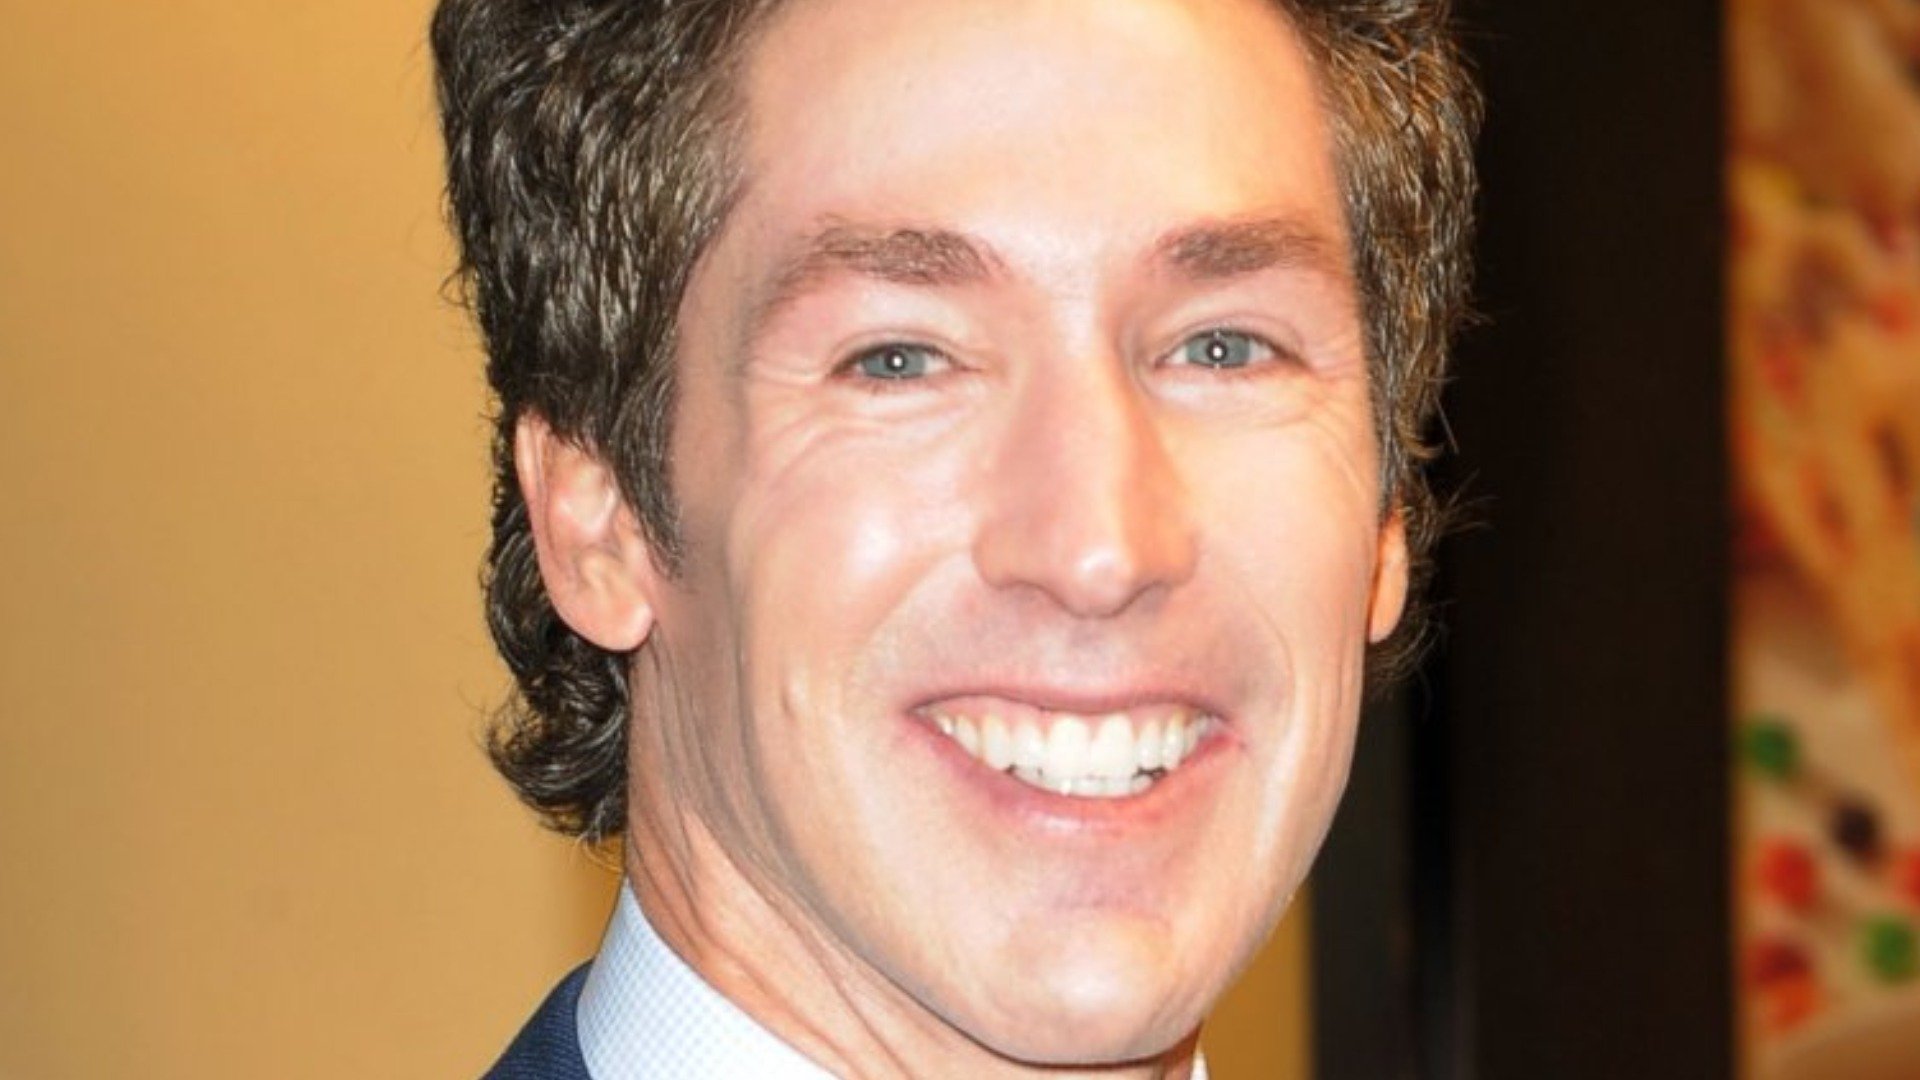 The Troubled History Of Joel Osteen